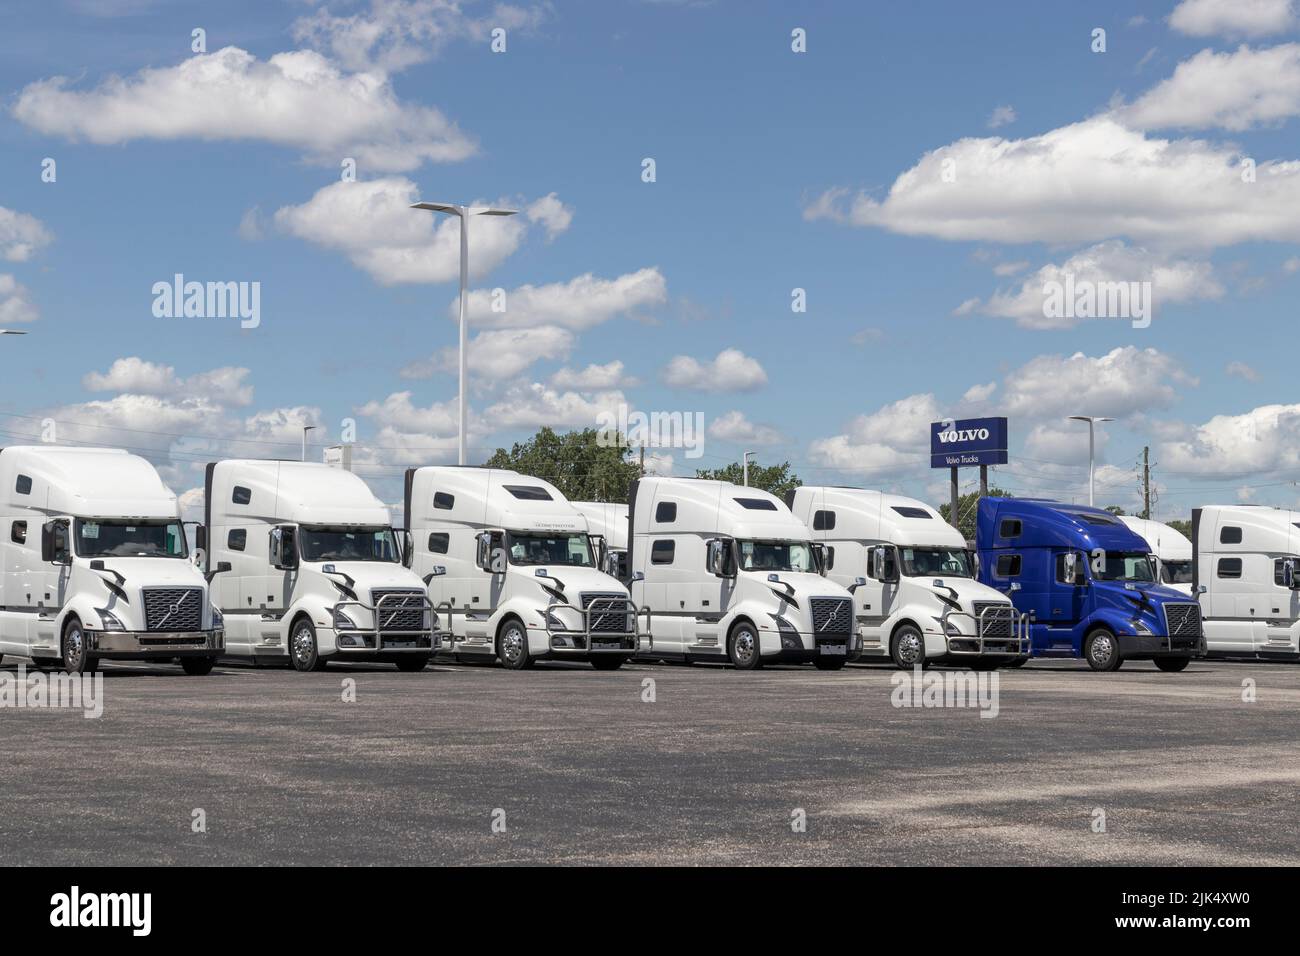 Indianapolis - Circa July 2022: Volvo Semi Tractor Trailer Big Rig Truck display at a dealership. Volvo Trucks is one of the largest truck manufacture Stock Photo